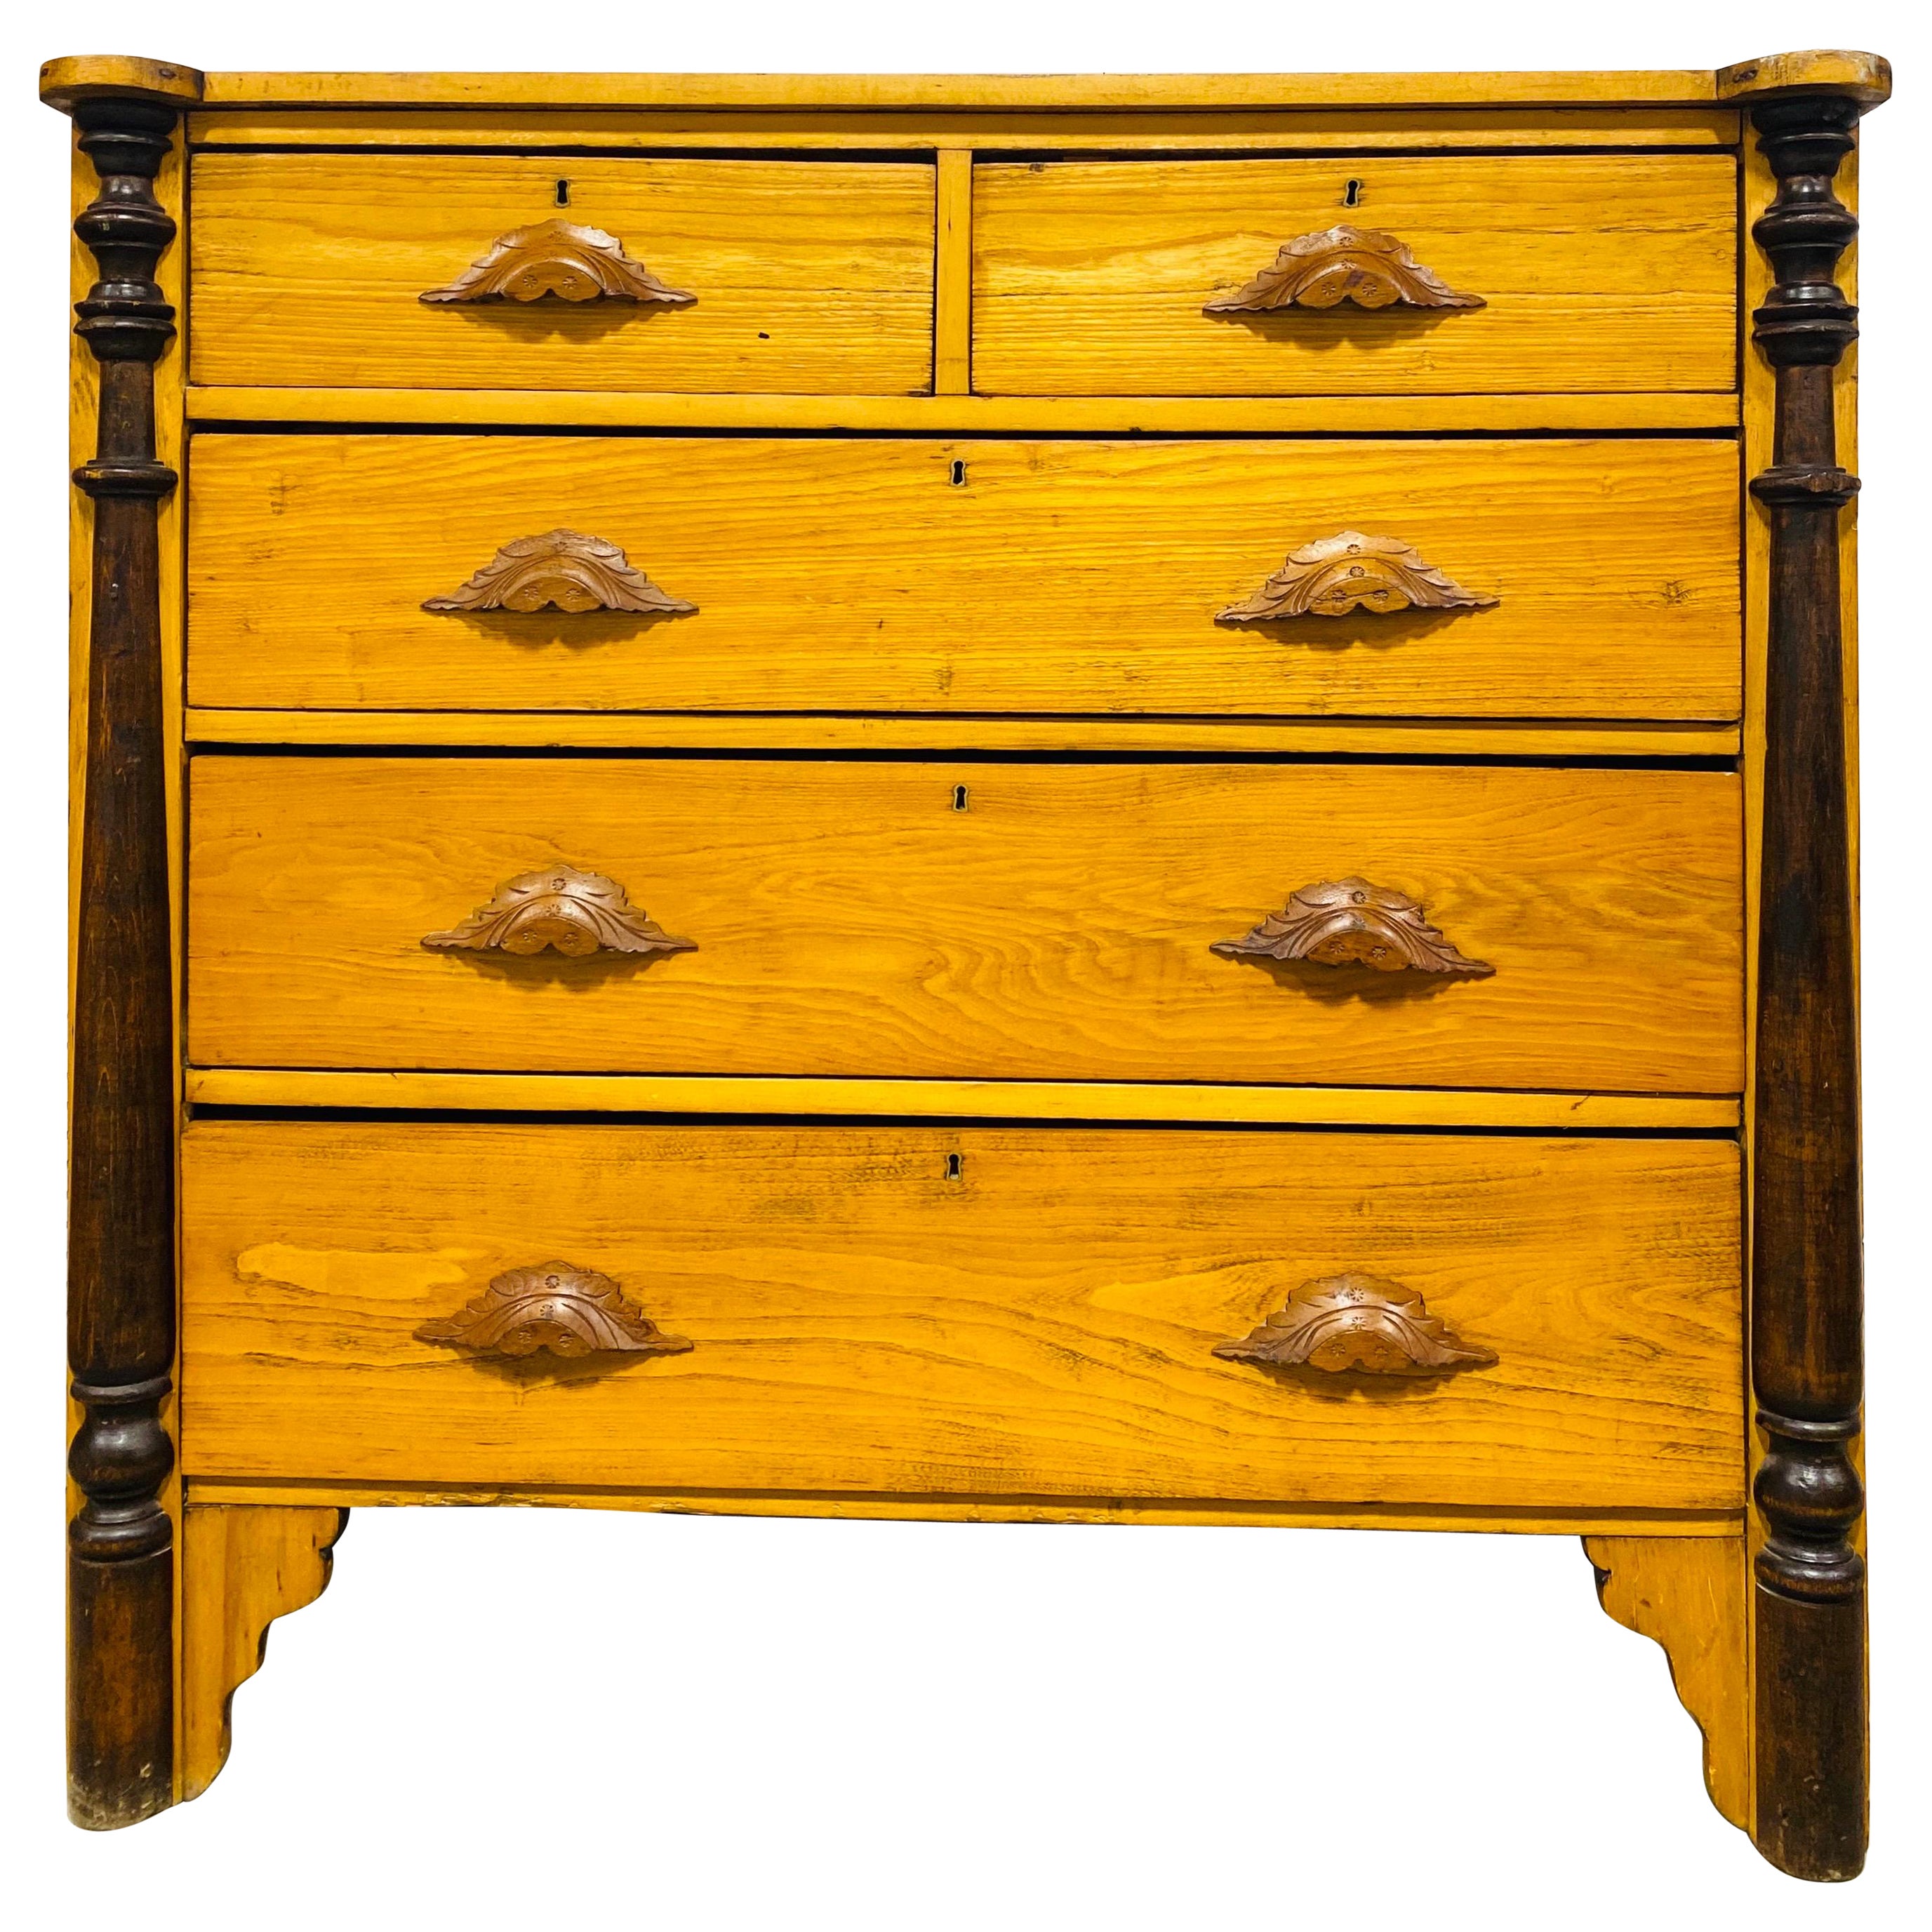 Late 19th century handcrafted rustic pine chest of drawers For Sale